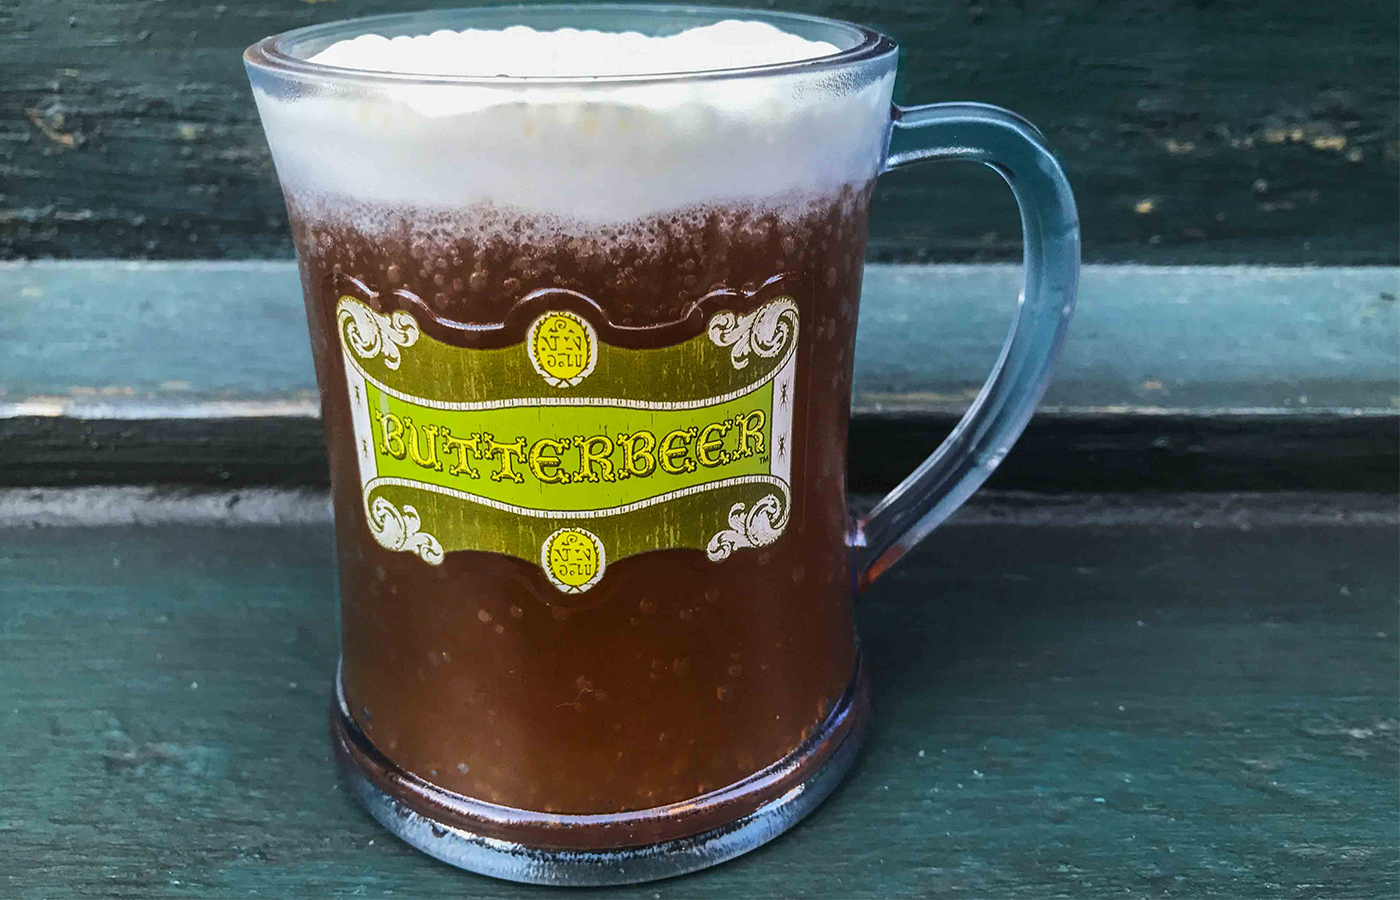 Butter Beer at the Wizarding World of Harry Potter